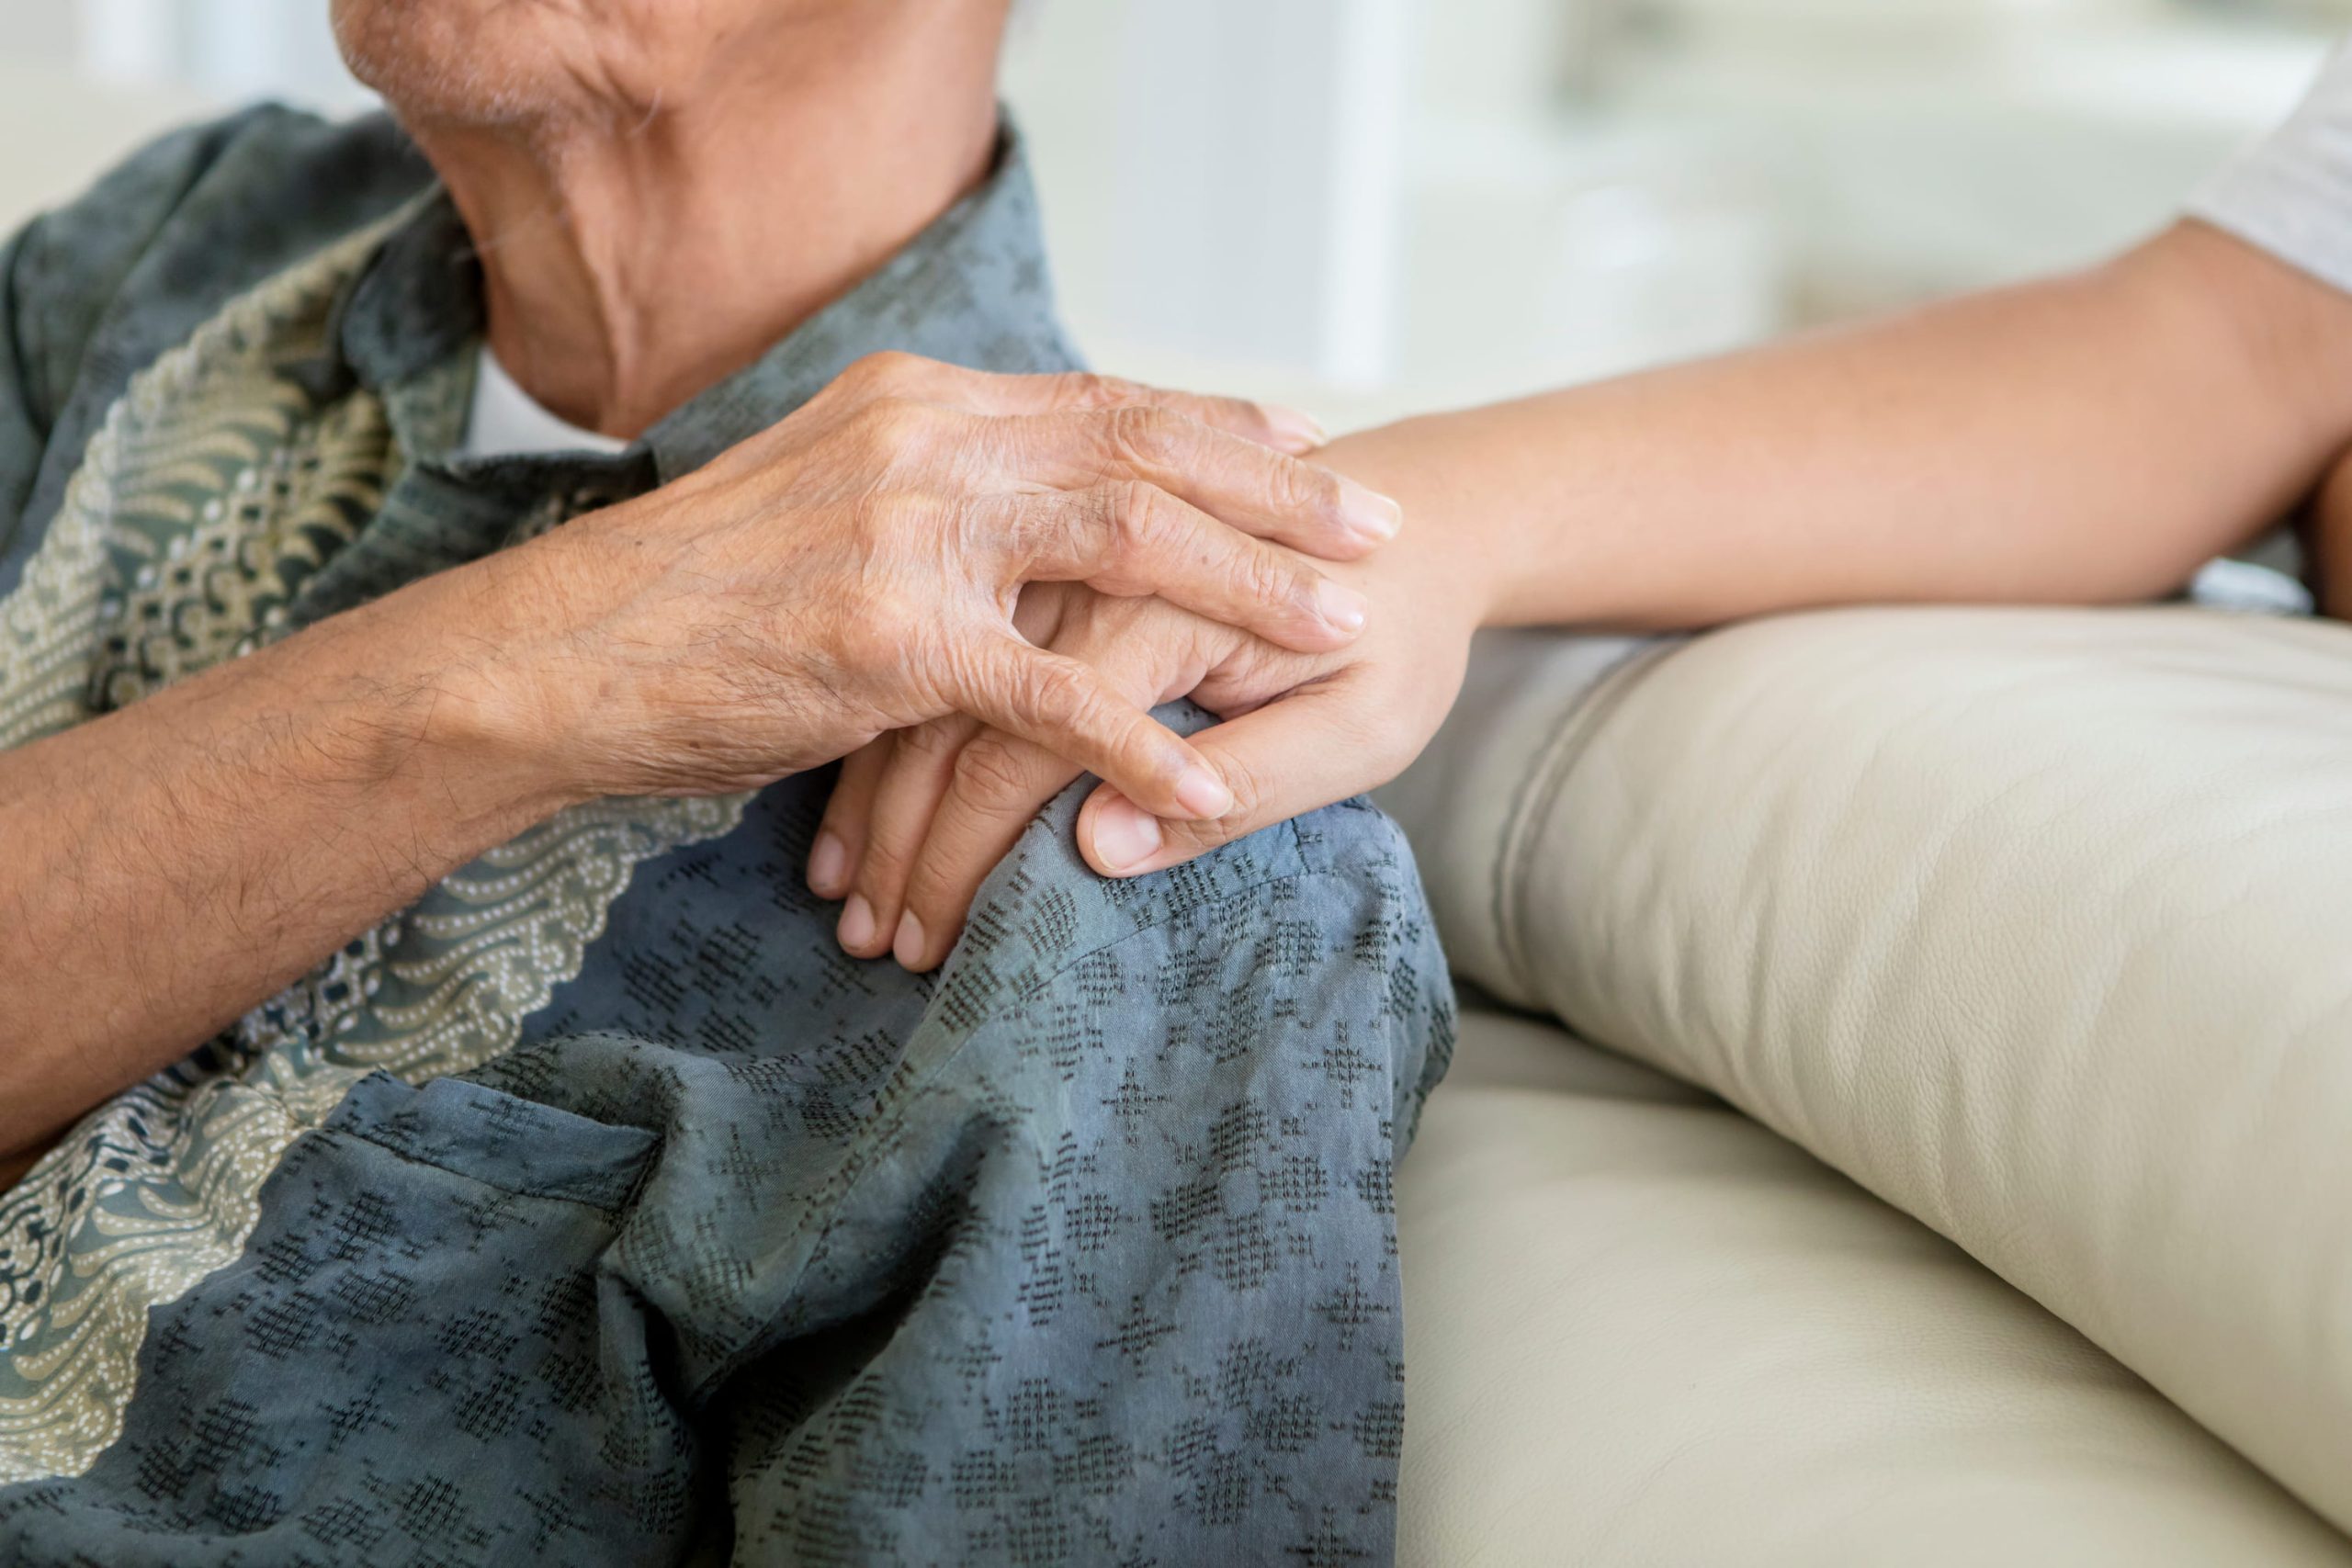 Close-up of a younger person holding an elderly person's hand in comfort, showcasing the compassionate aspect of healthcare IoT.